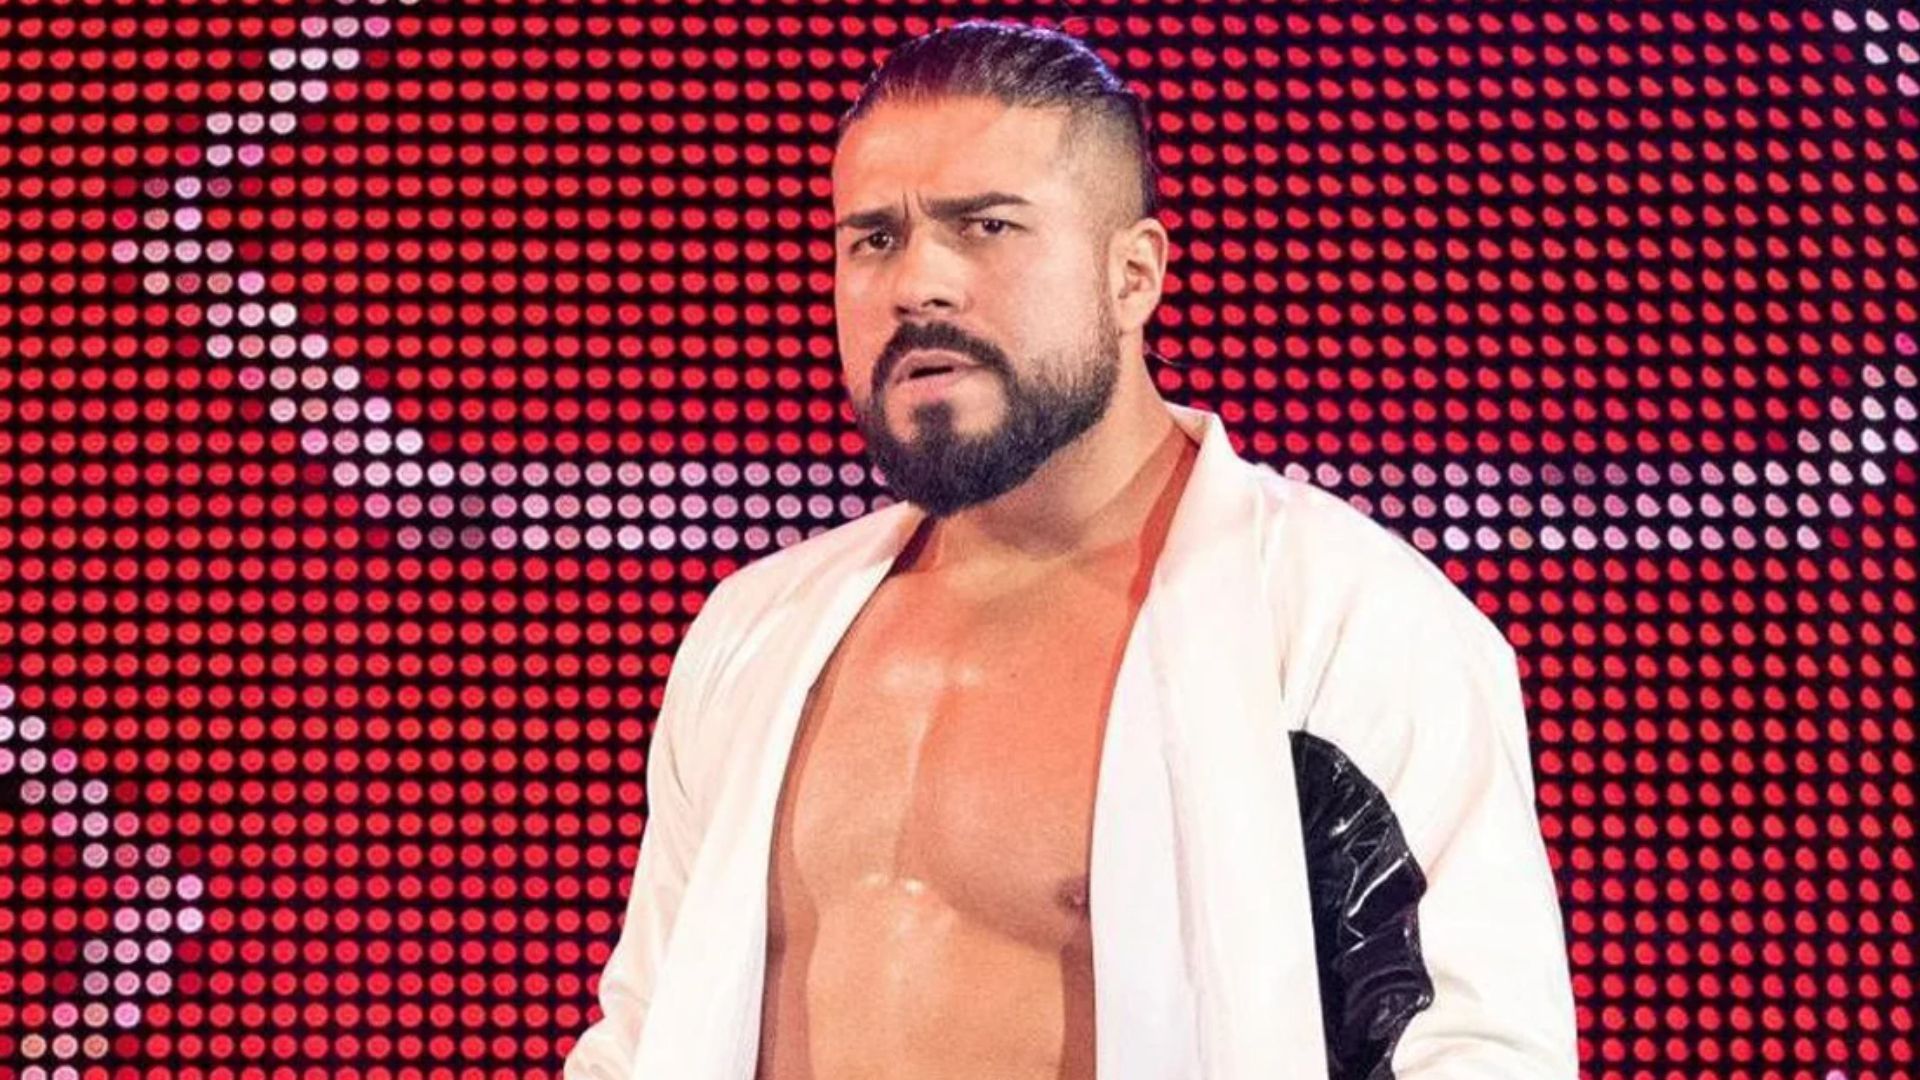 Former WWE Superstar and current AEW star Andrade El Idolo